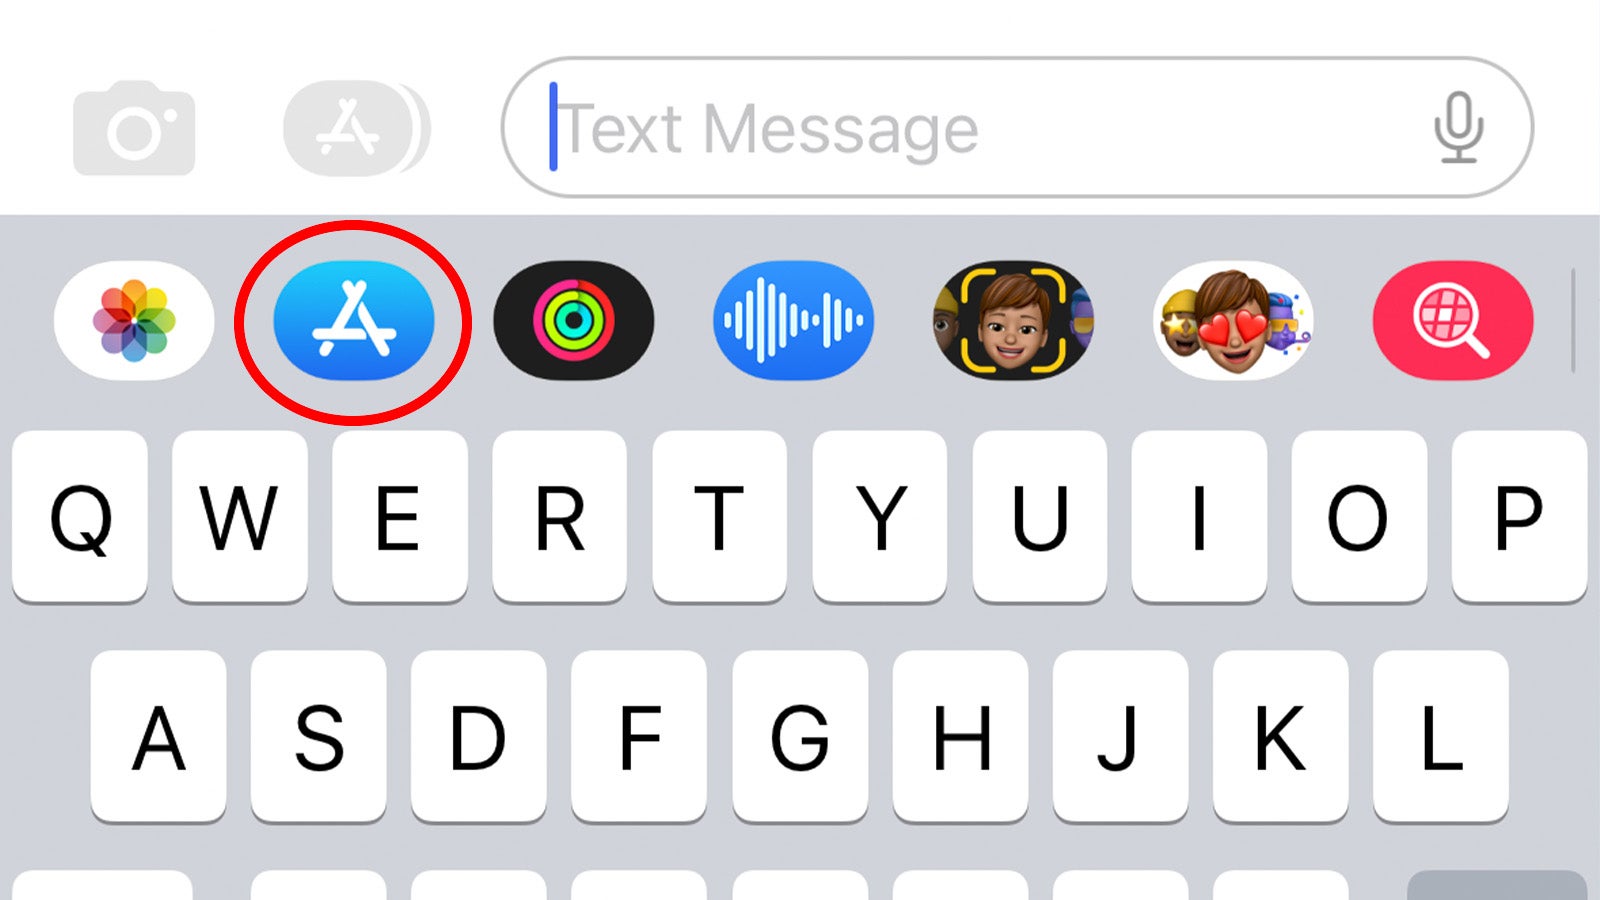 App icon tray in messages app